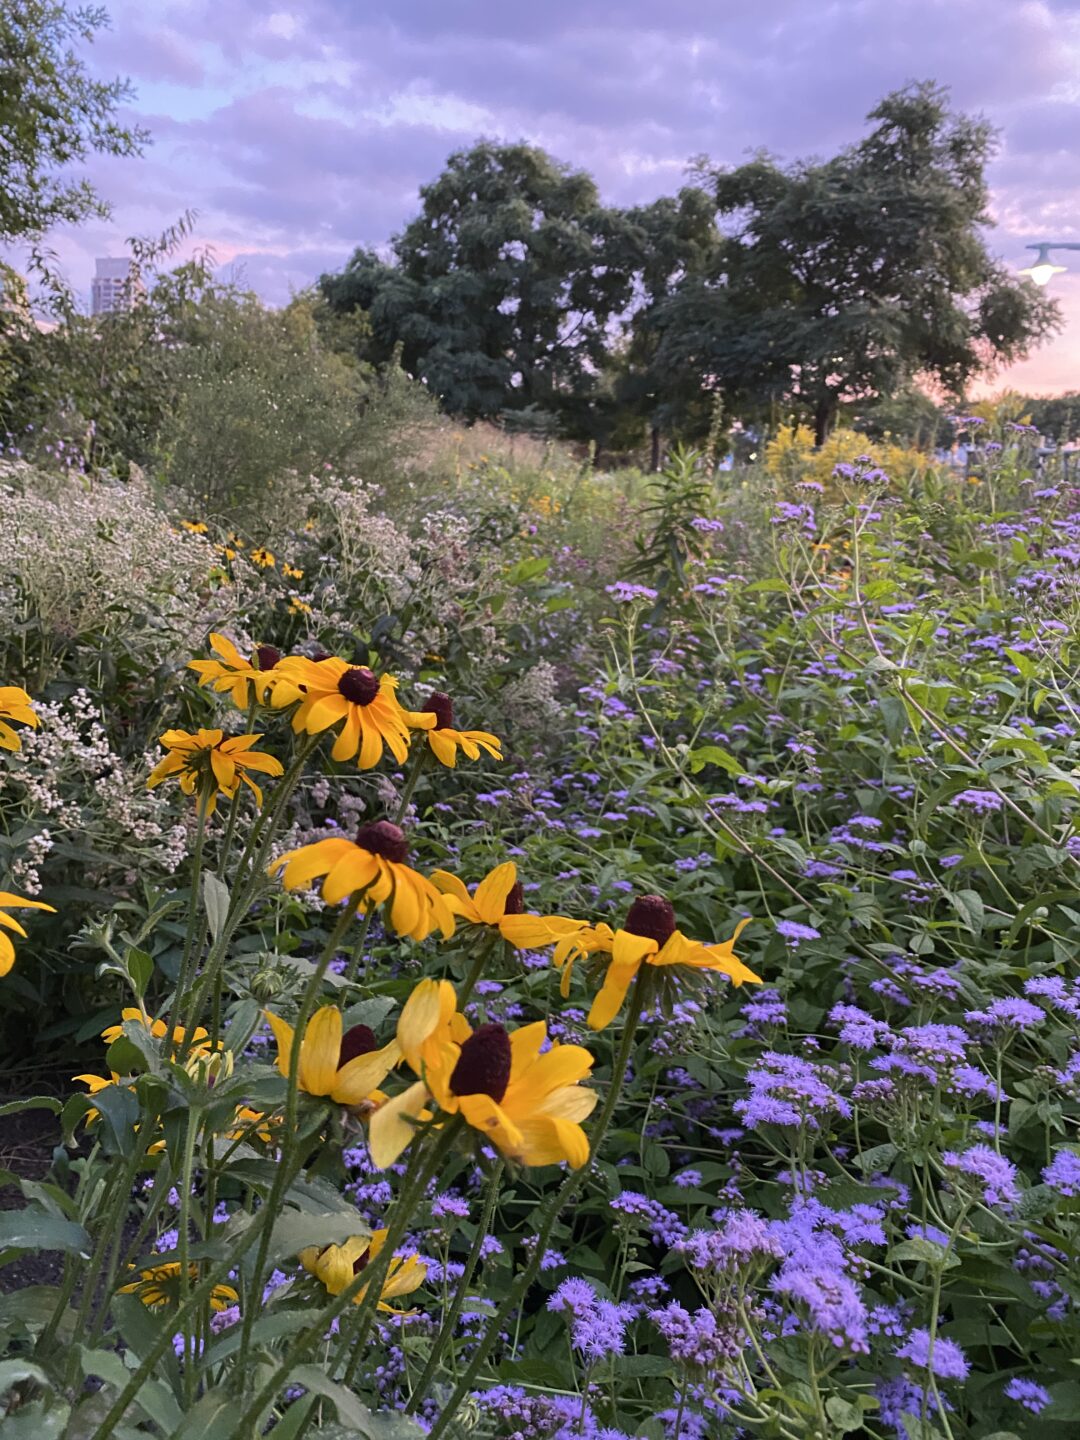 Purple and yellow flowers in a Park garden at sunset